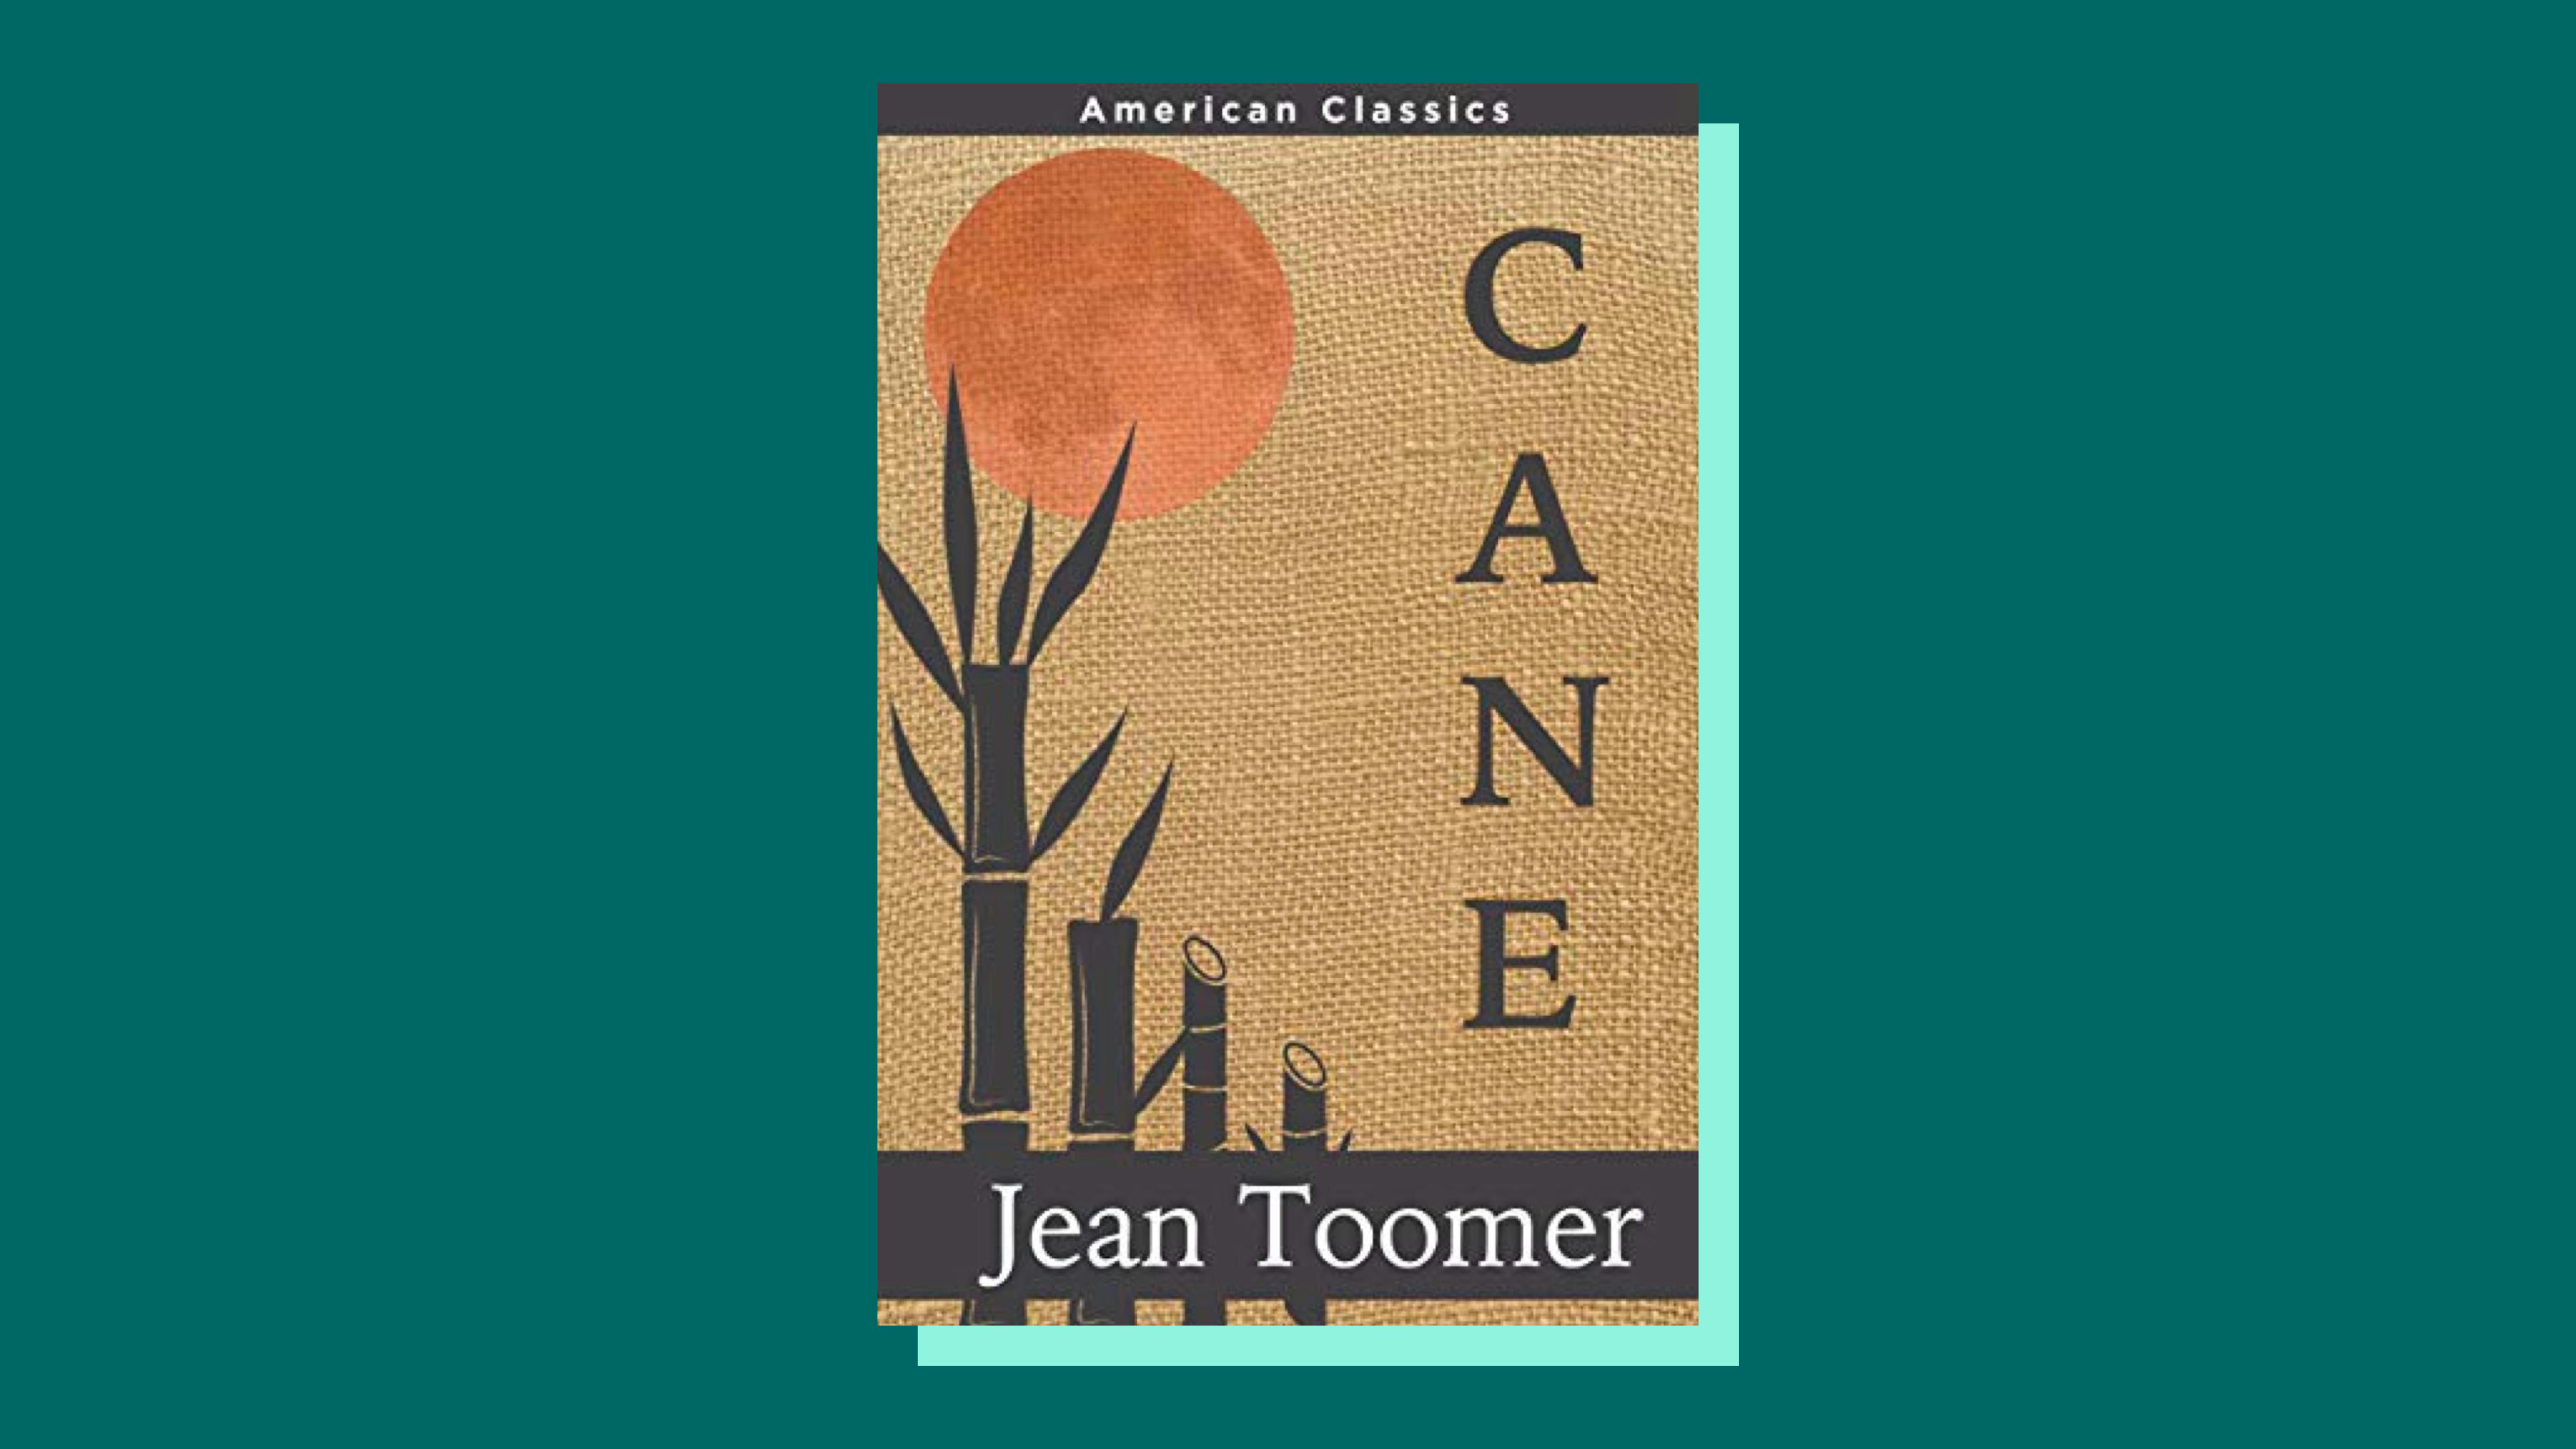 “Cane” by Jean Toomer 